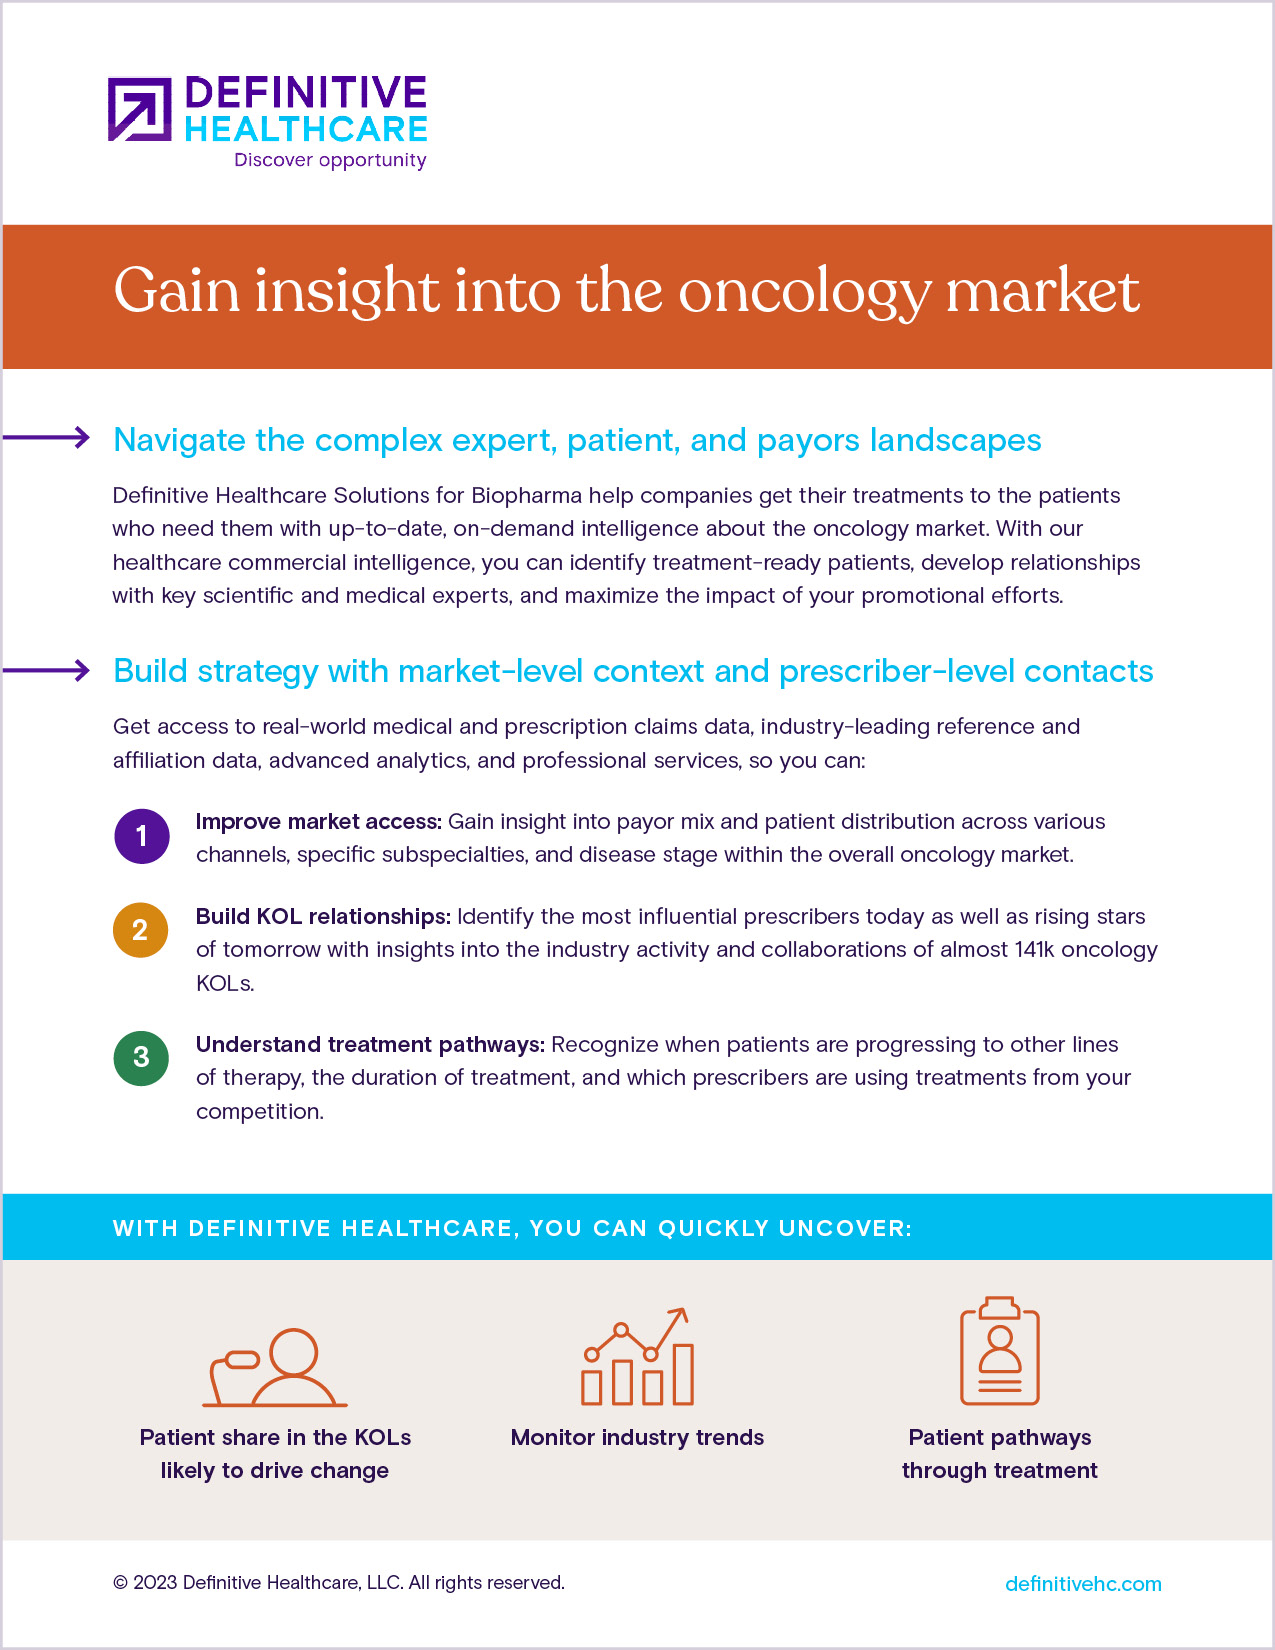 Gain insight into the oncology market